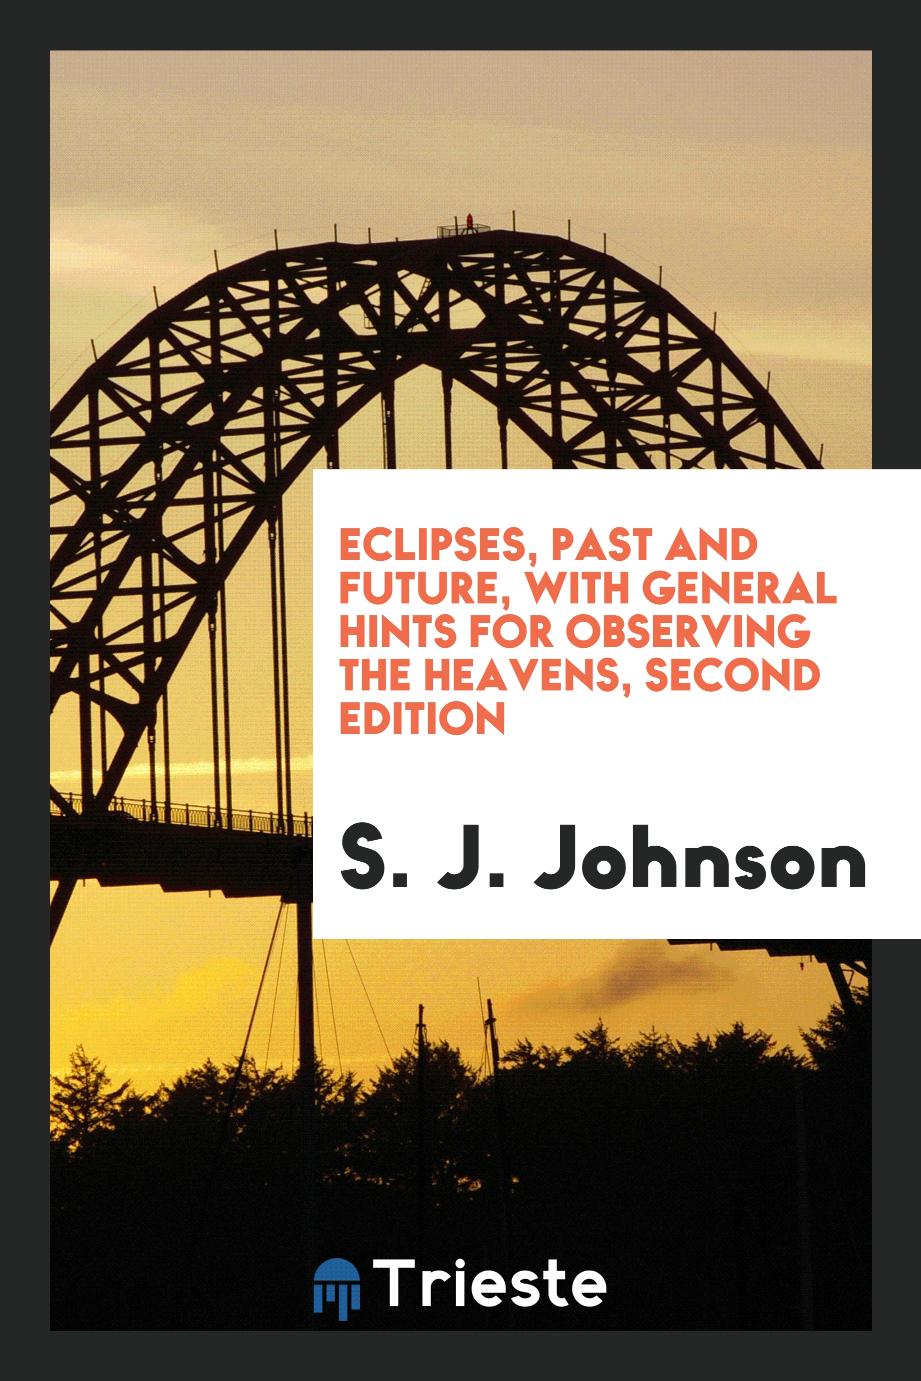 Eclipses, past and future, with general hints for observing the heavens, Second edition